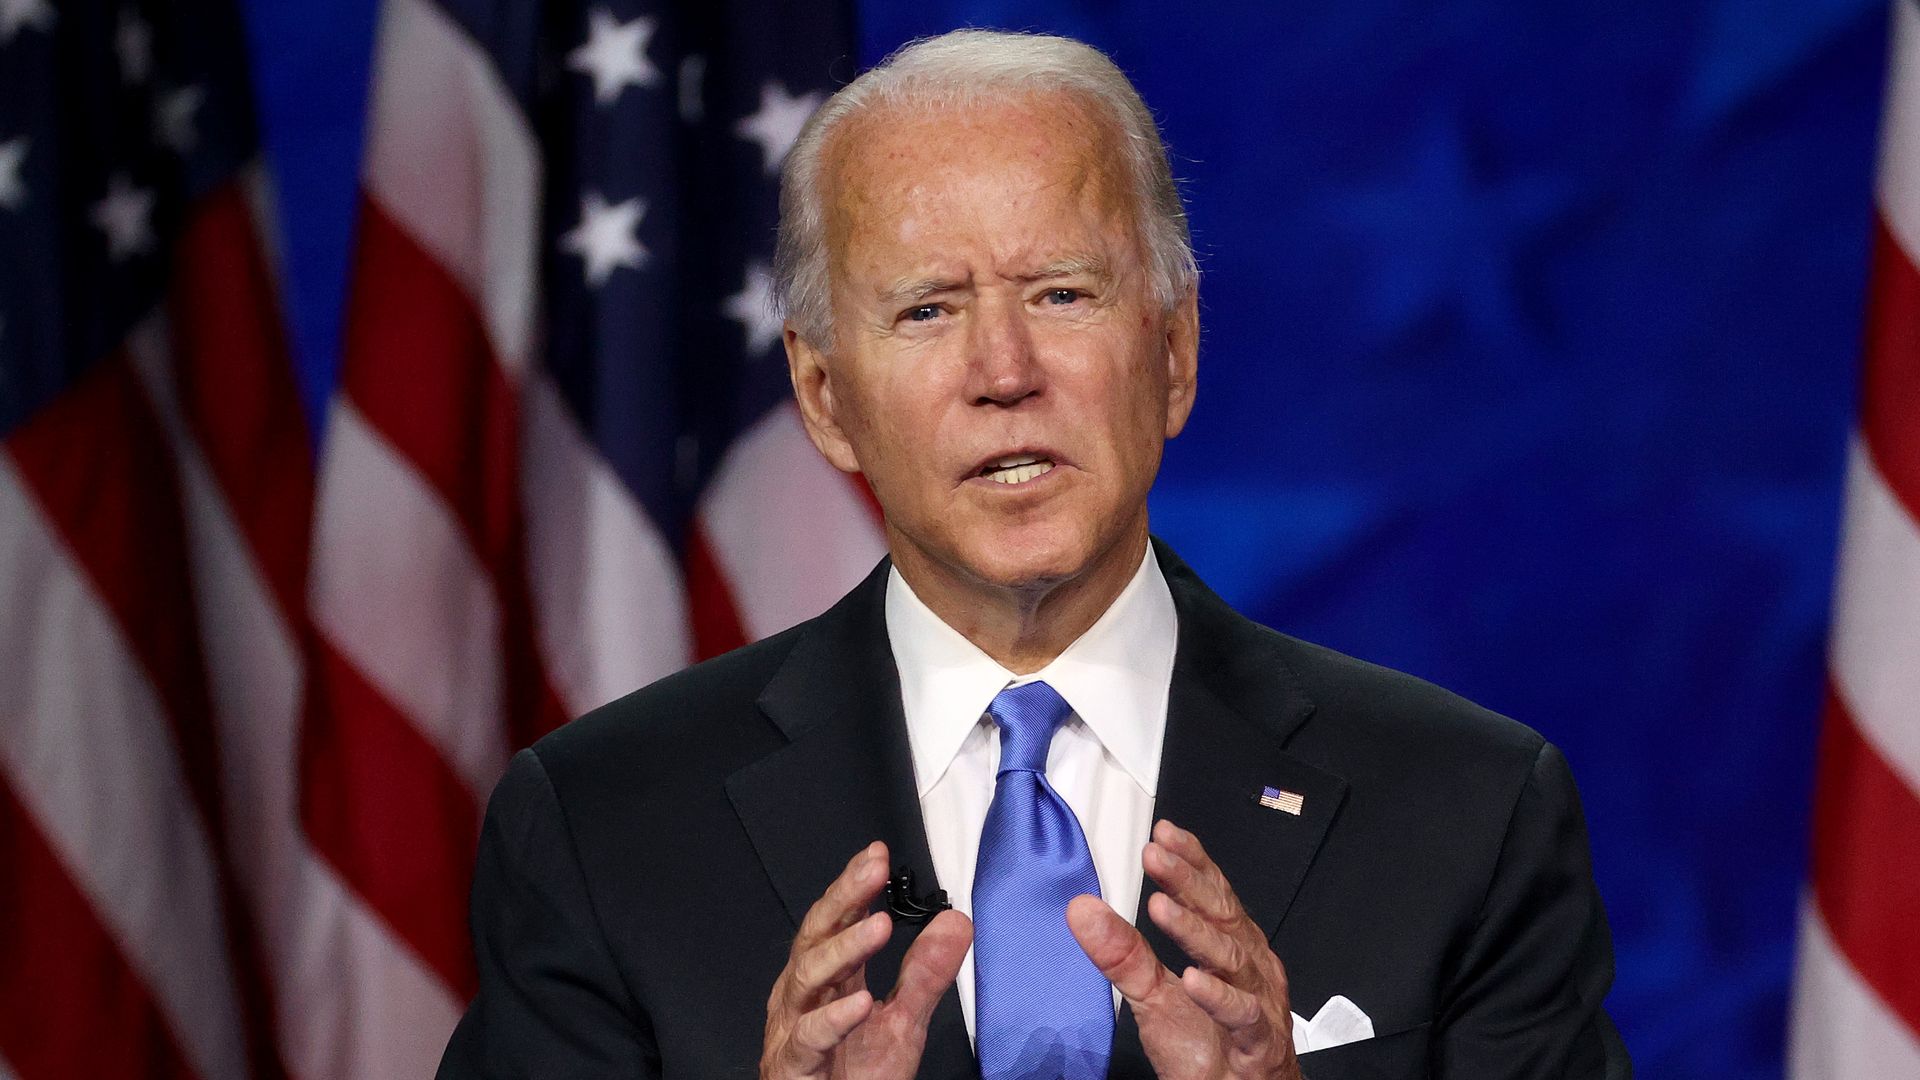 Democratic presidential nominee Joe Biden delivers his acceptance speech on the fourth night of the Democratic National Convention from the Chase Center on August 20